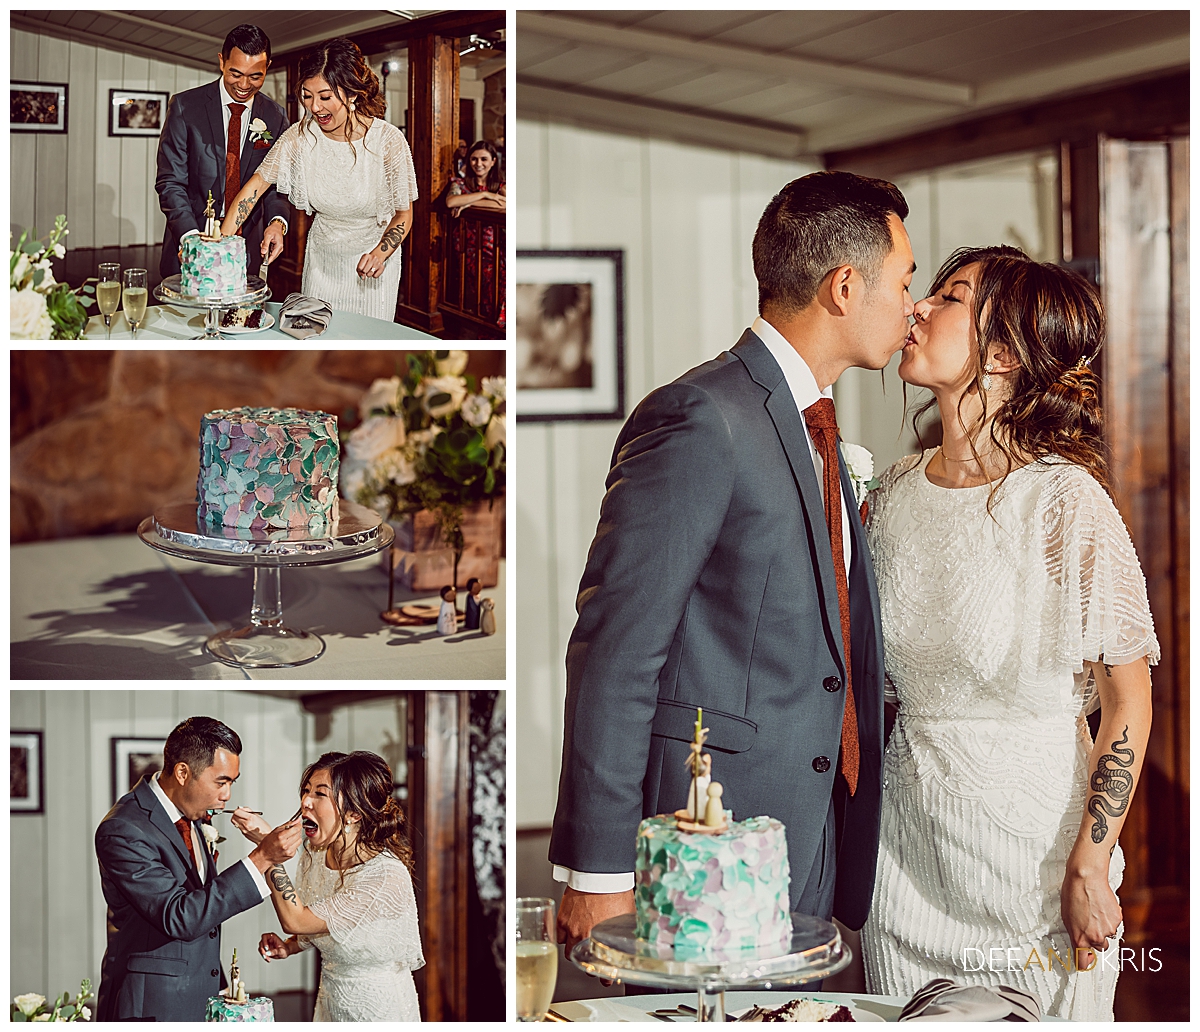 Four images: Tope left image of bride and groom cutting cake. Middle left image of cake on crystal cake stand. Bottom right image of couple feeding each other cake. Right image of couple kissing after feeding each other cake.